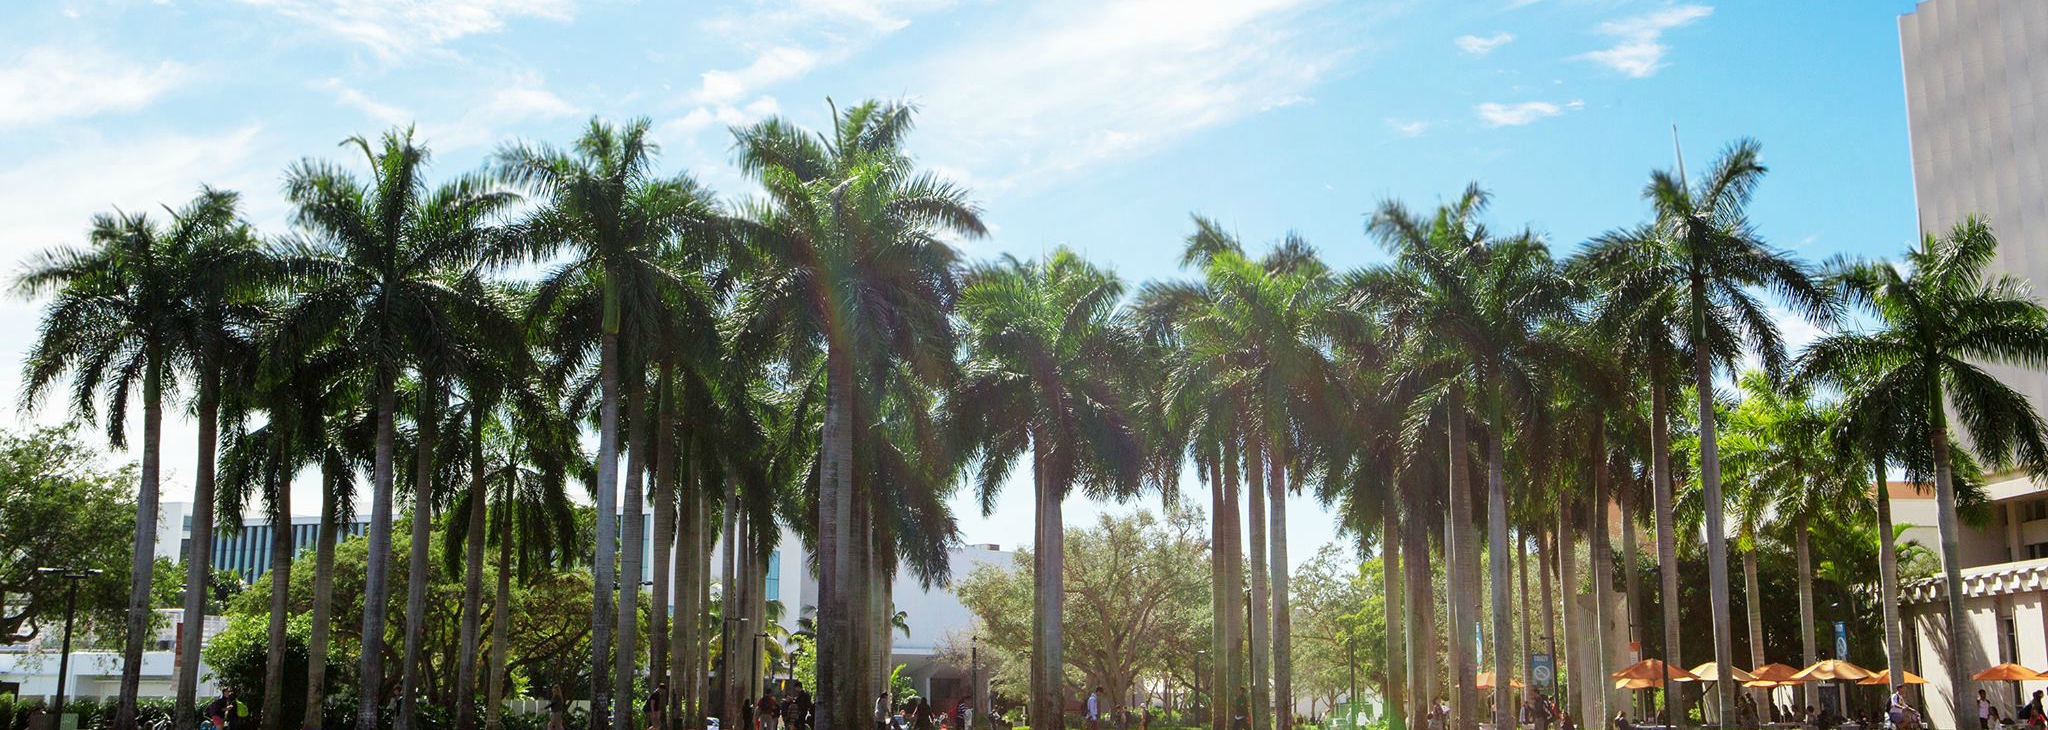 Campus palm trees